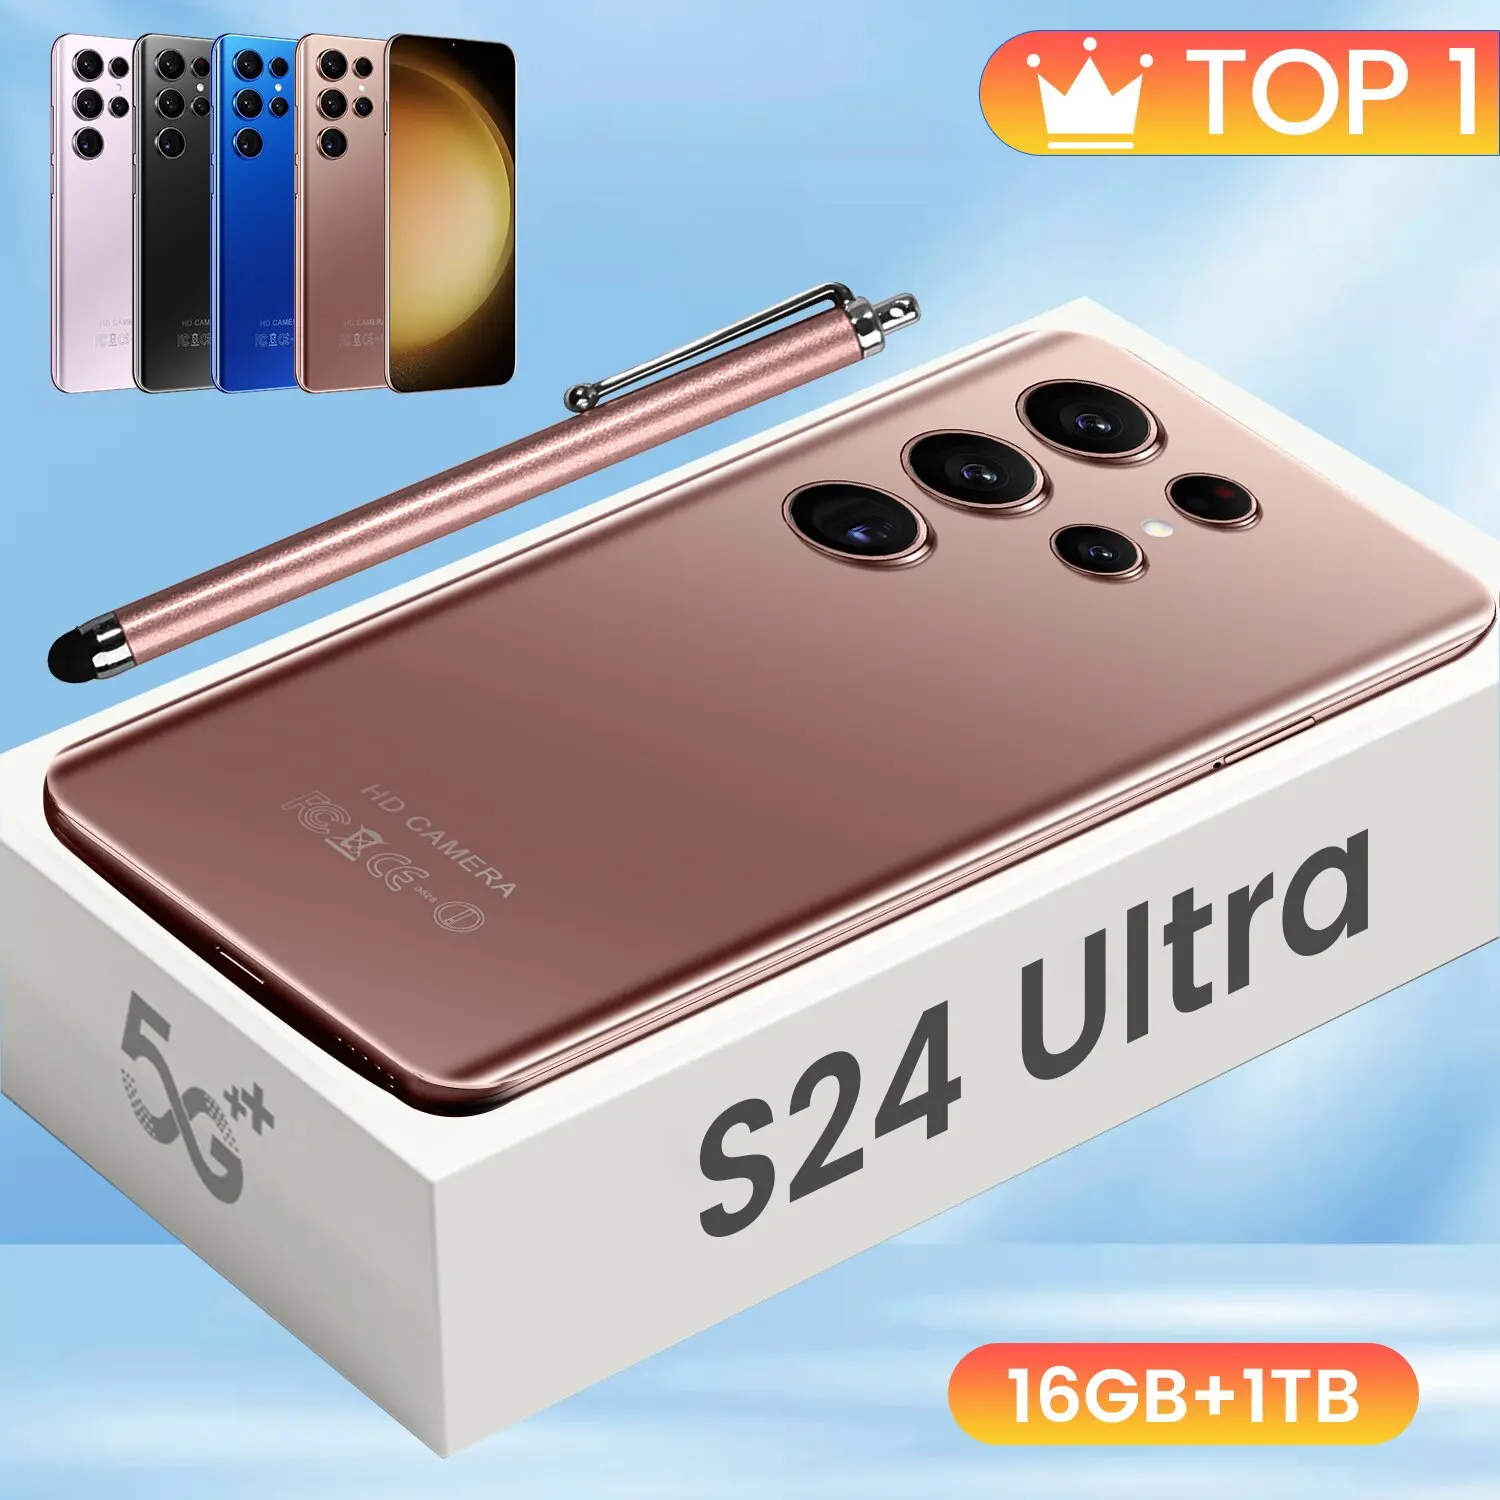 

S24 Ultra new smartphone android phone 7.3inch hd screen cell phone pro telefone 6800mAh 16+1TB Camera 5g mobile phones unlock